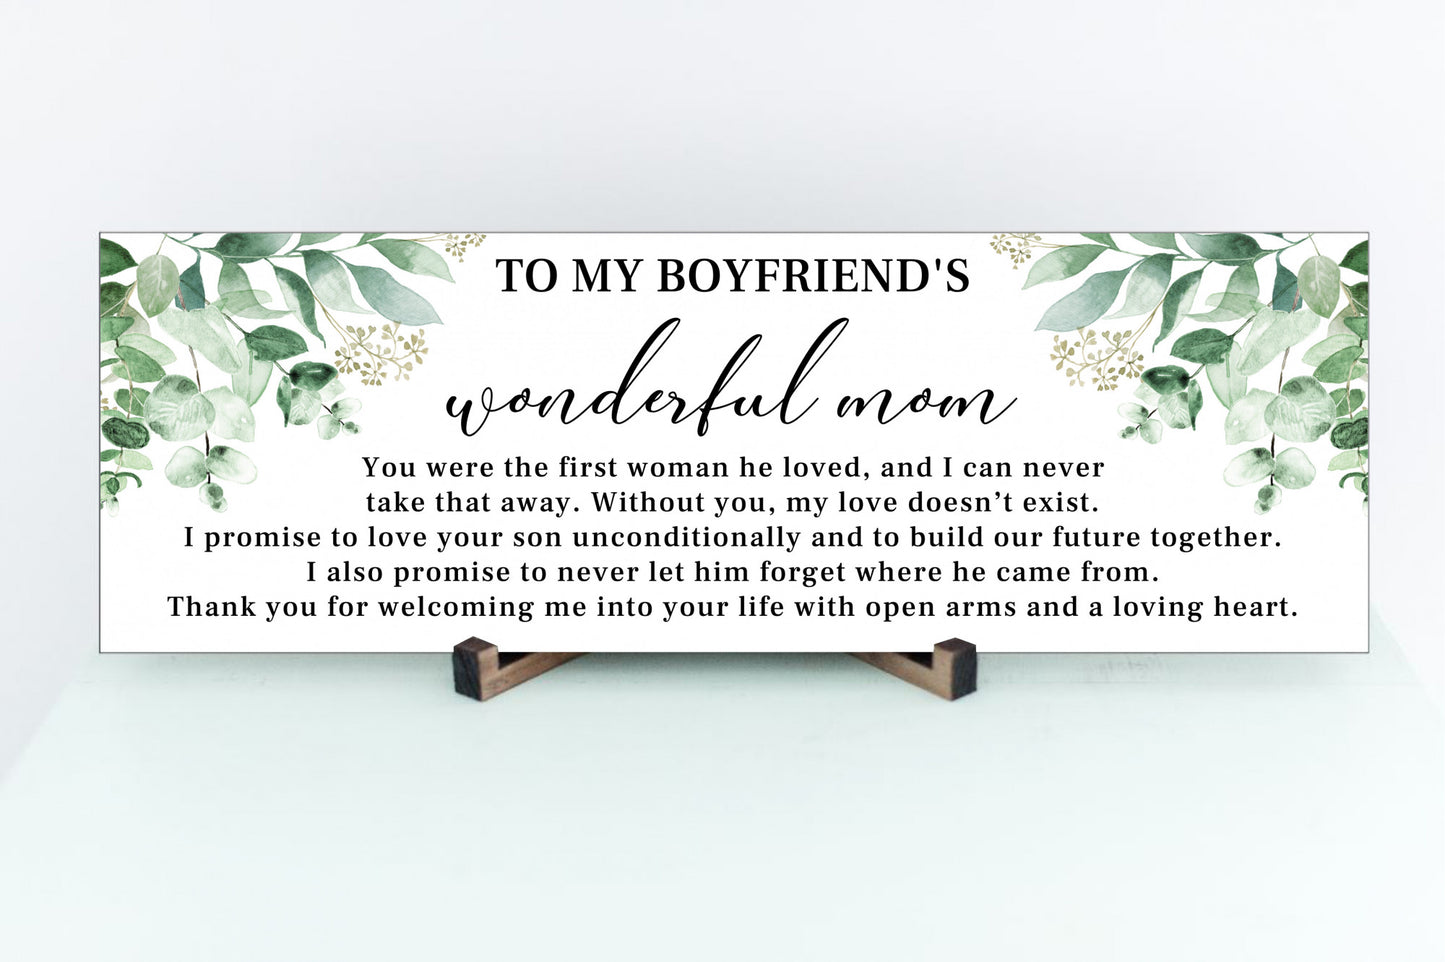 To My Boyfriend's Wonderful Mom Sign, Price Includes Shipping